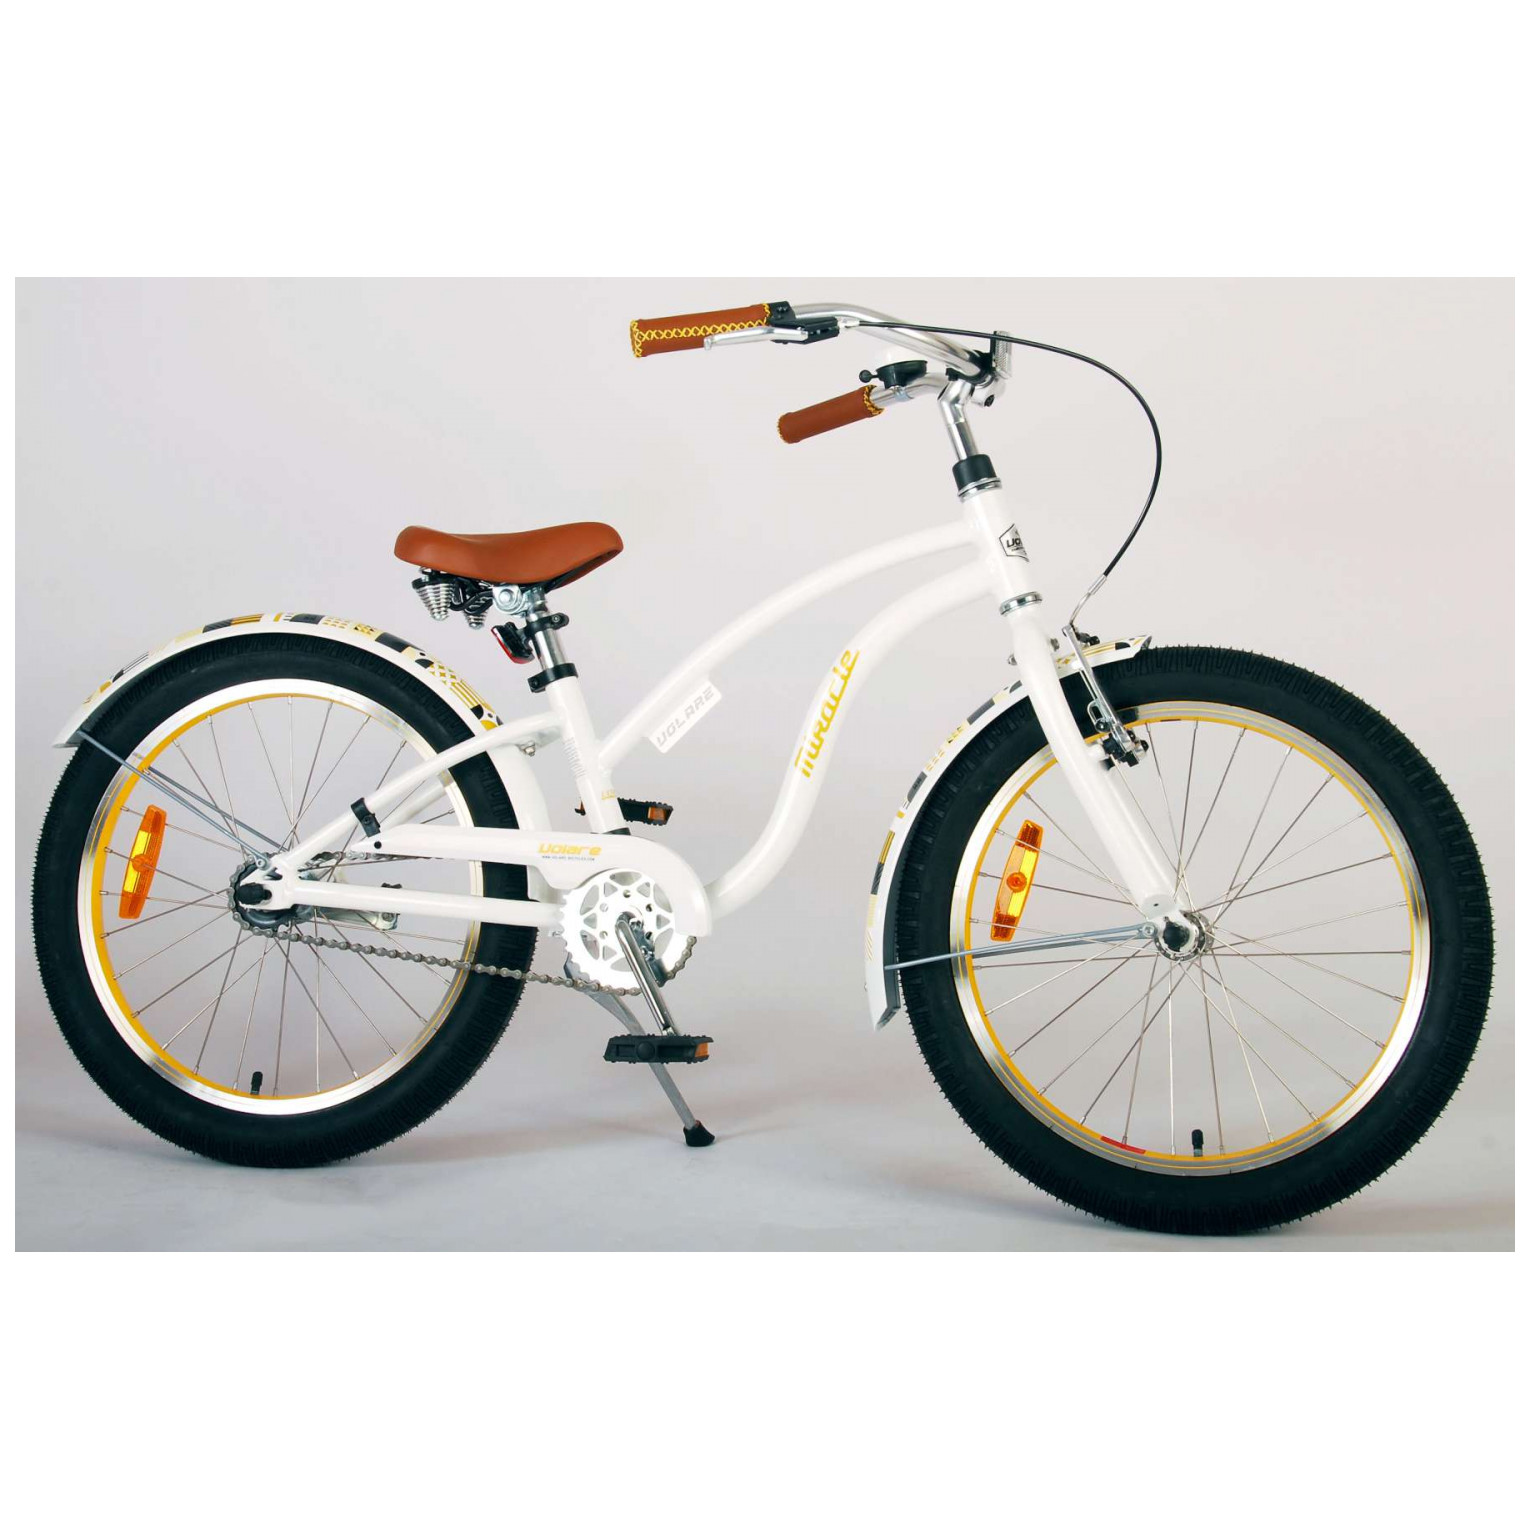 Volare Miracle Cruiser Fiets - 20 inch - Wit